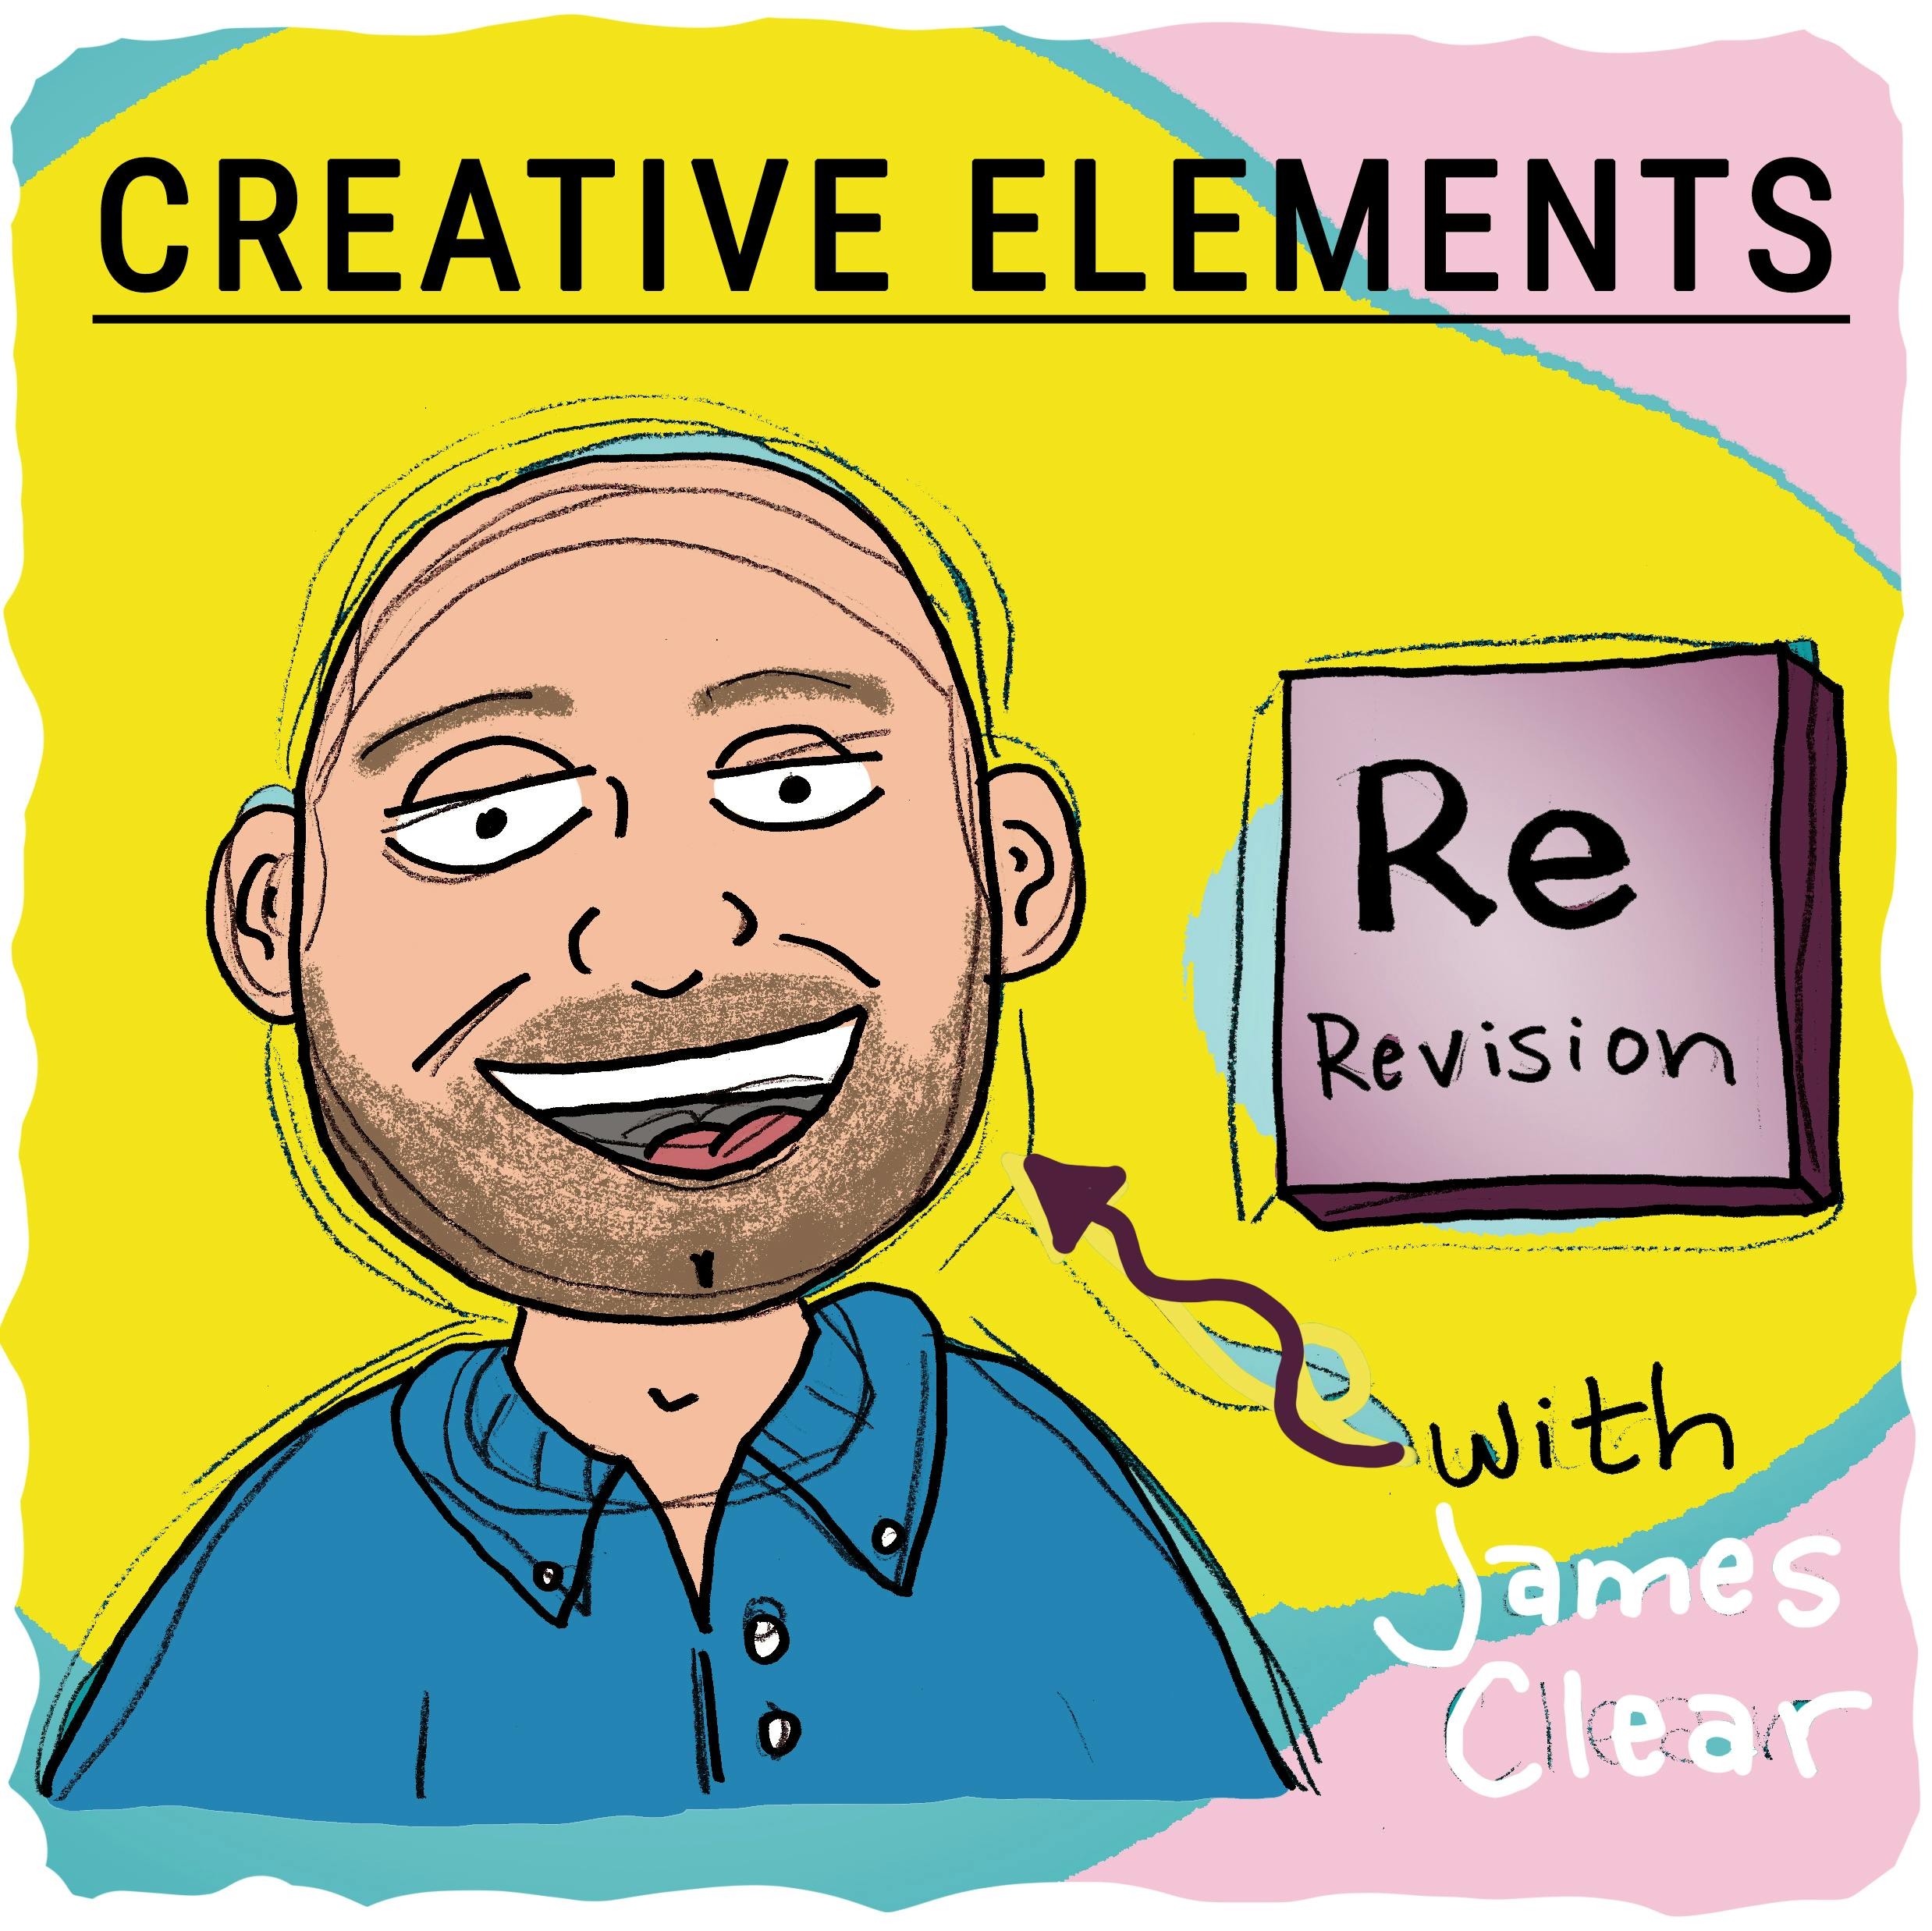 #2: James Clear [Revision] Image